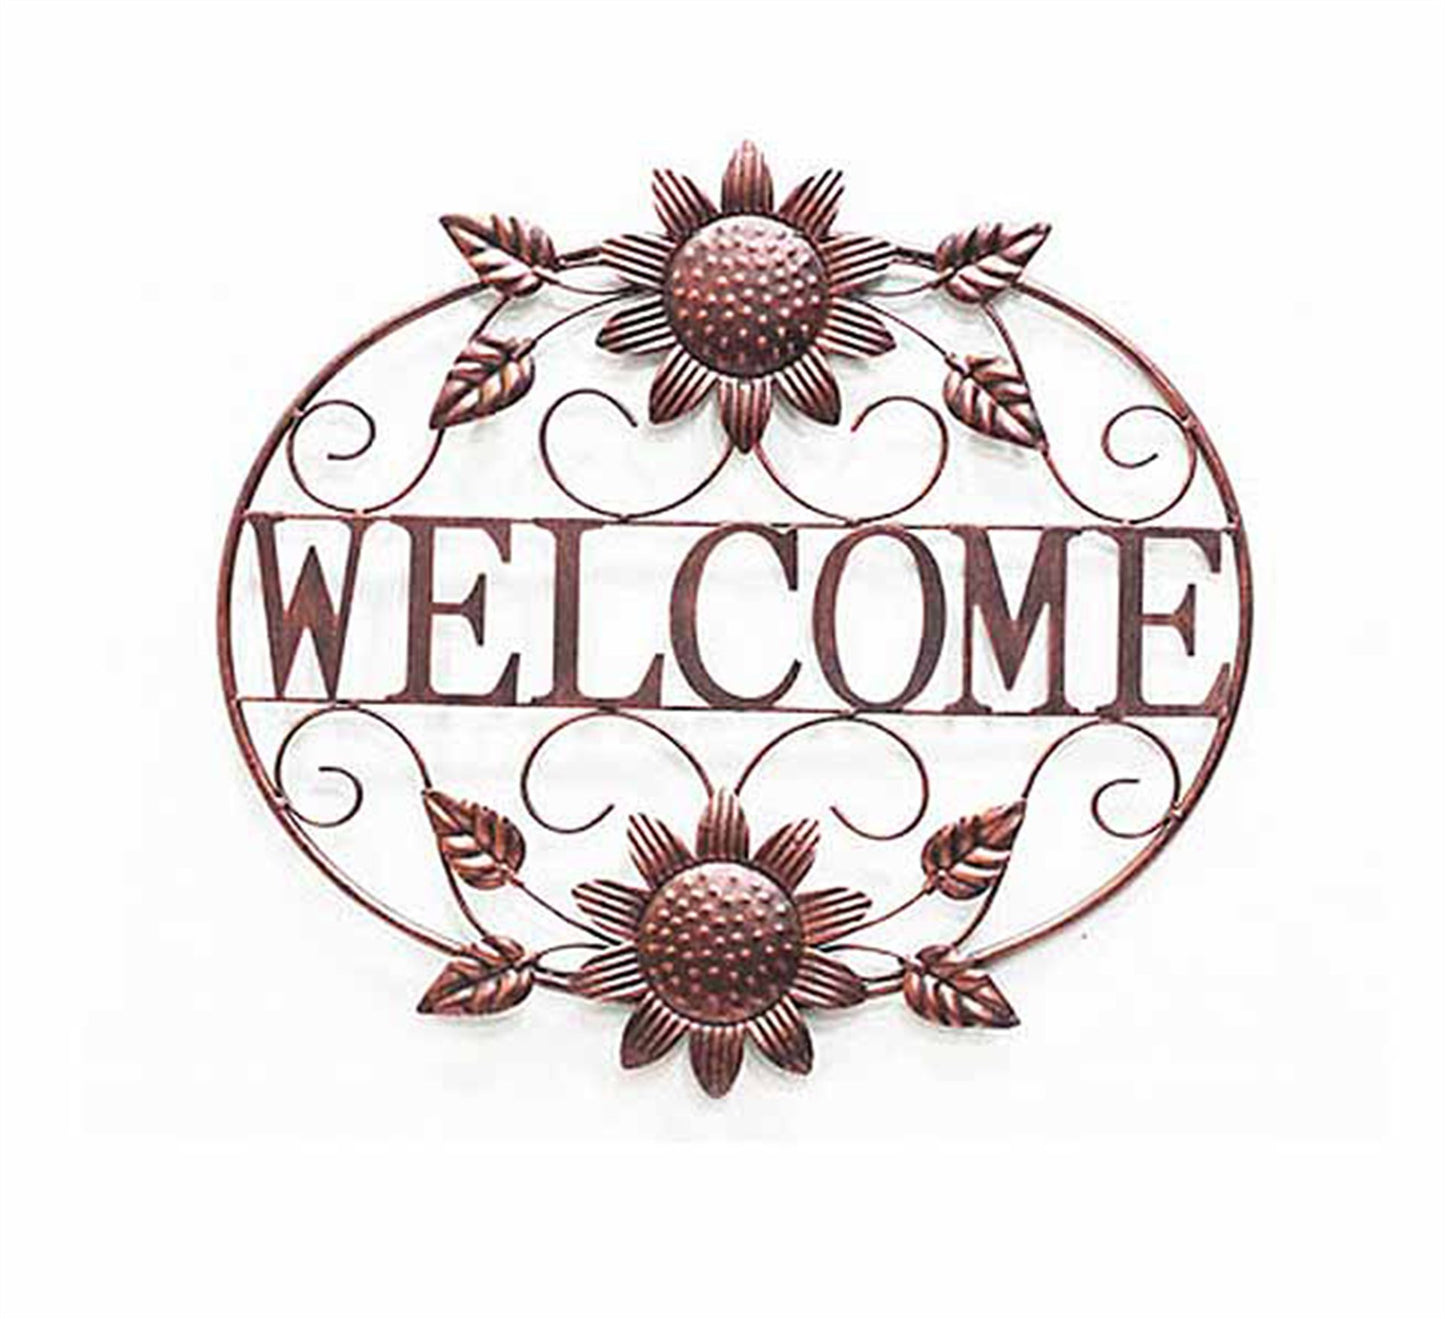 Garden - Welcome Sign With Sunflowers - Bronze coloured metal